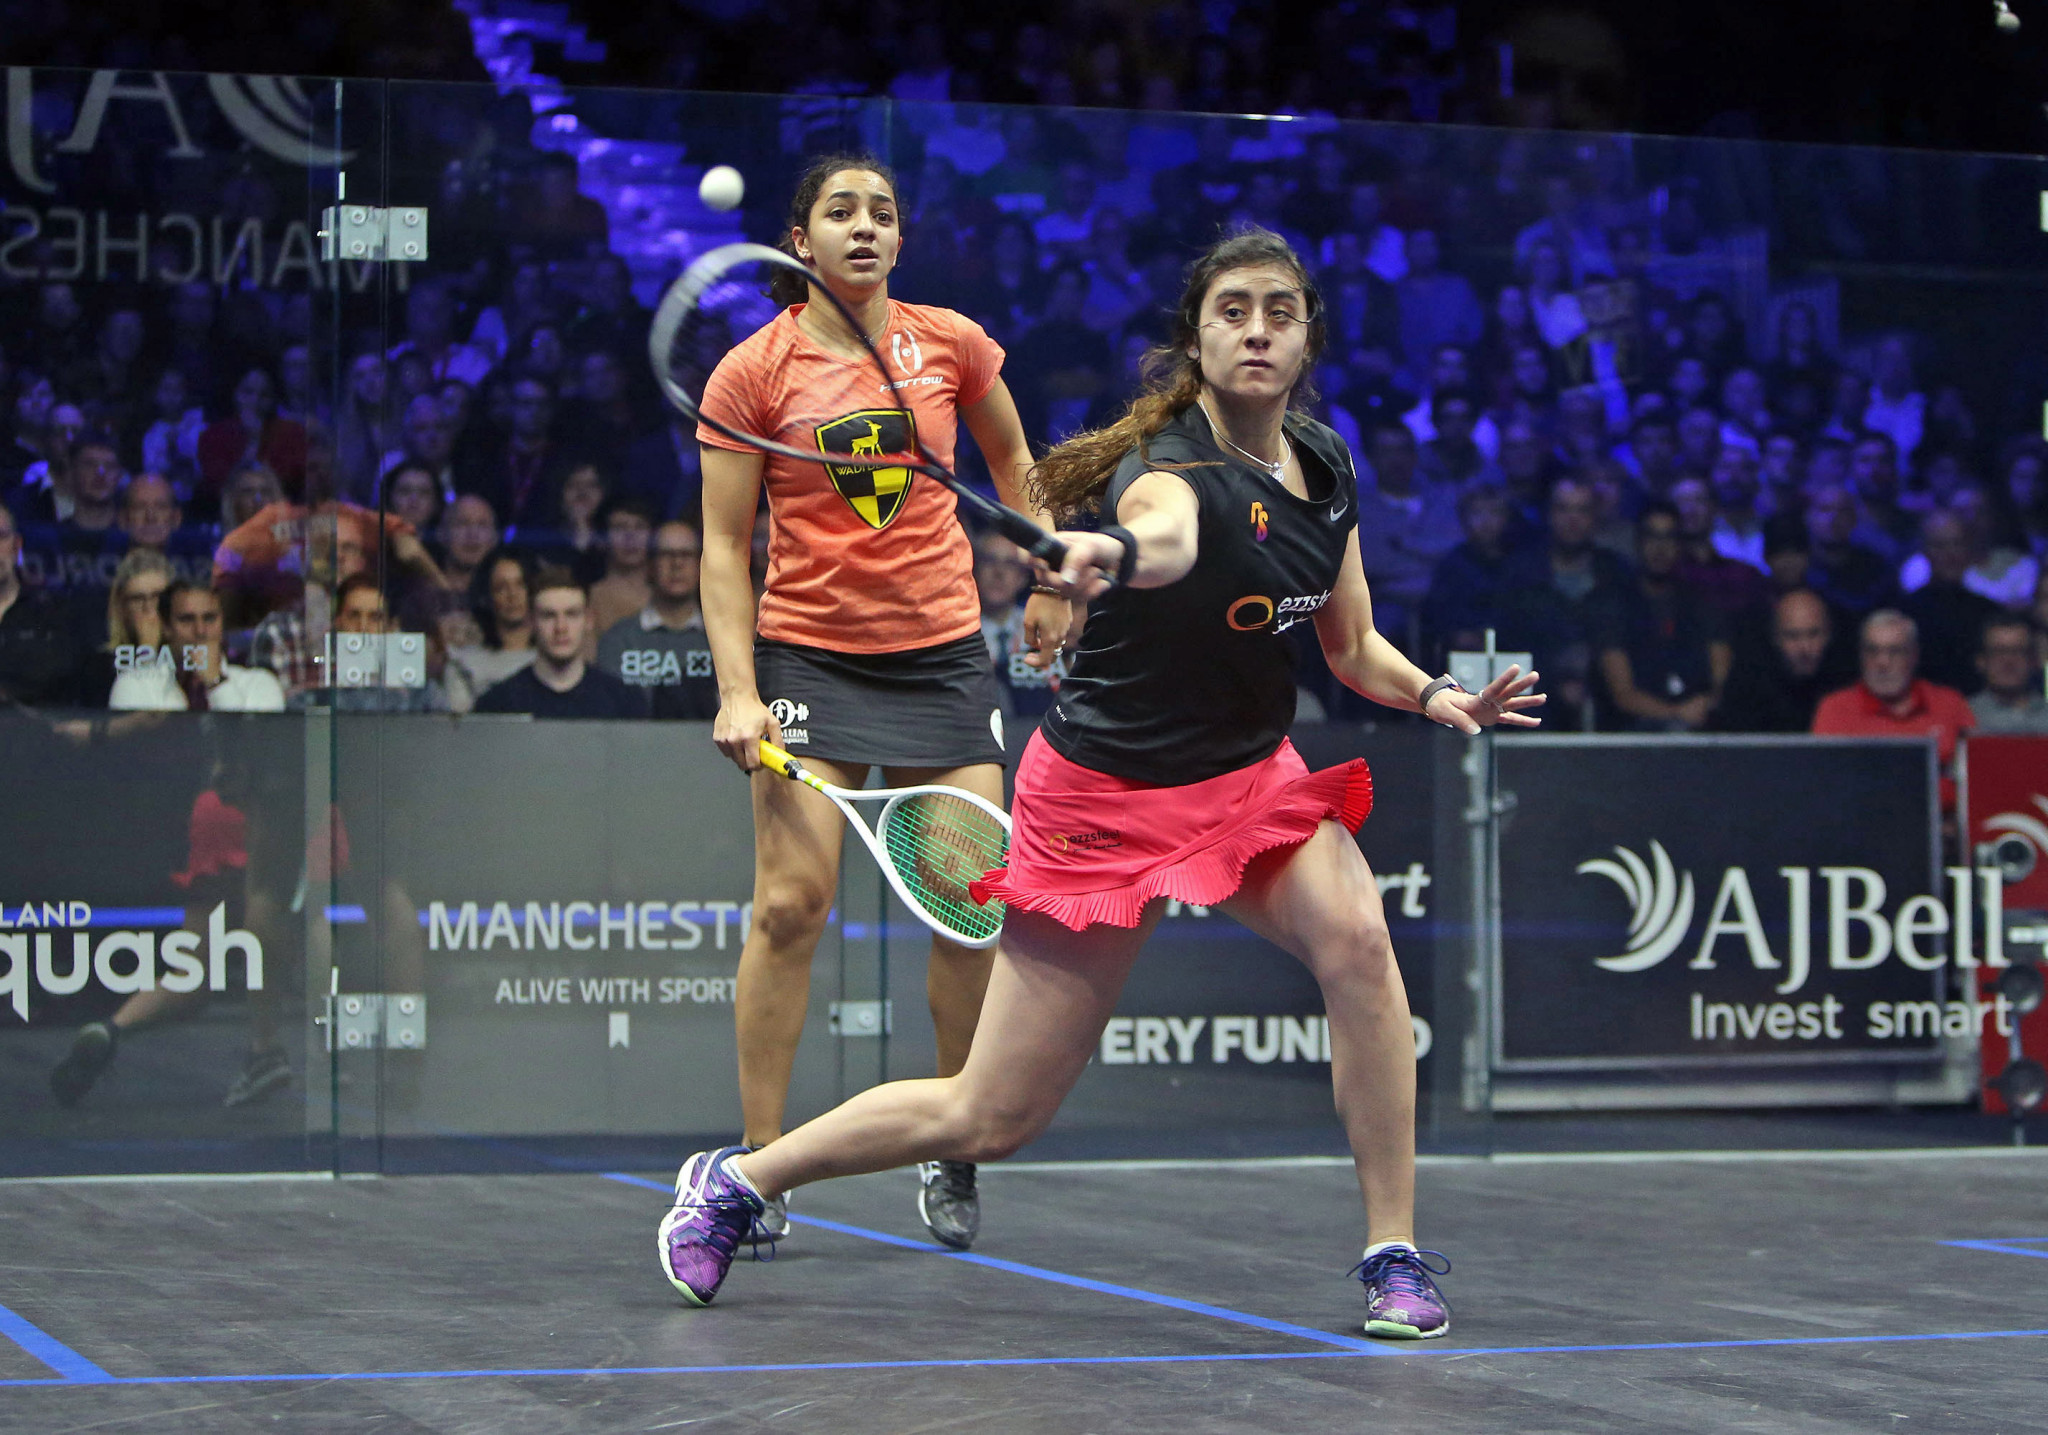 The gender gap in pay is narrowing as the PSA announces a radical new tour for 2018-2019 ©PSA